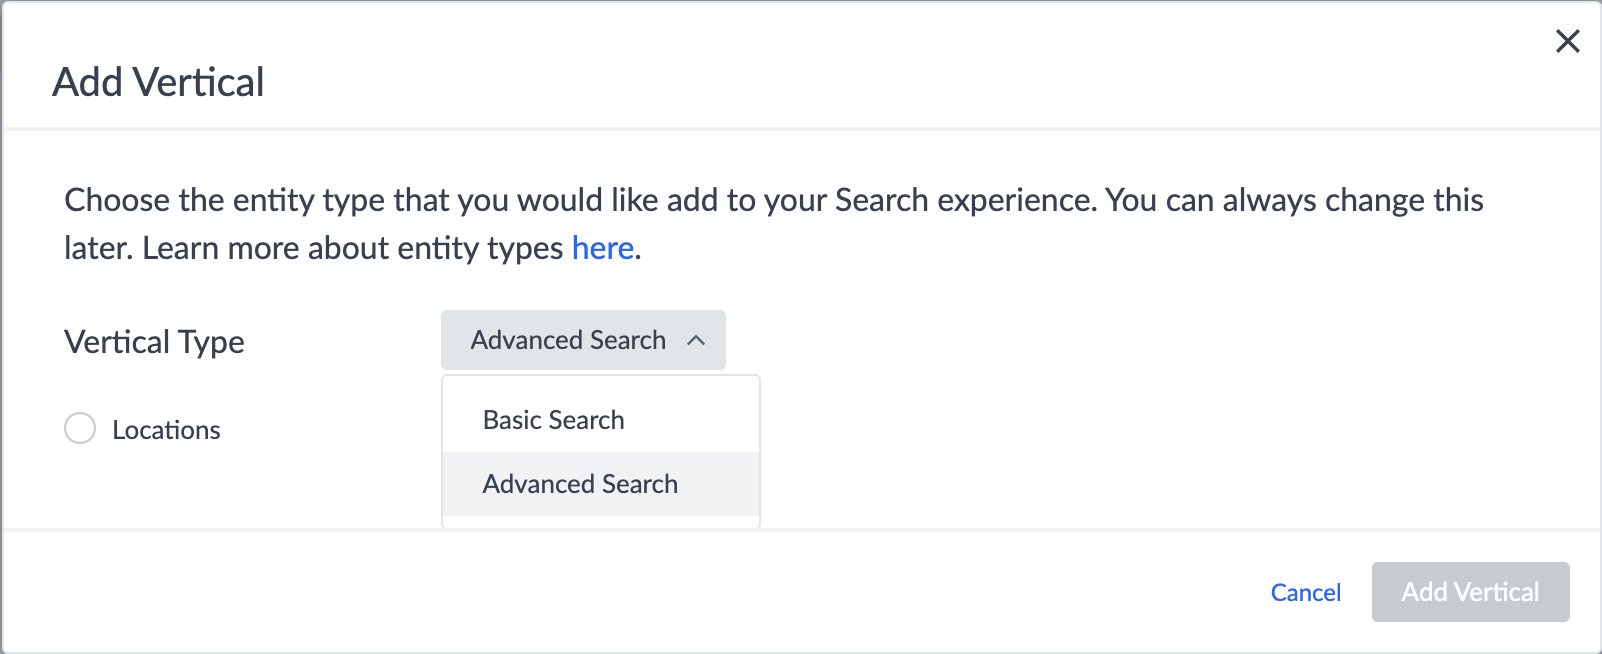 add vertical and select search tier